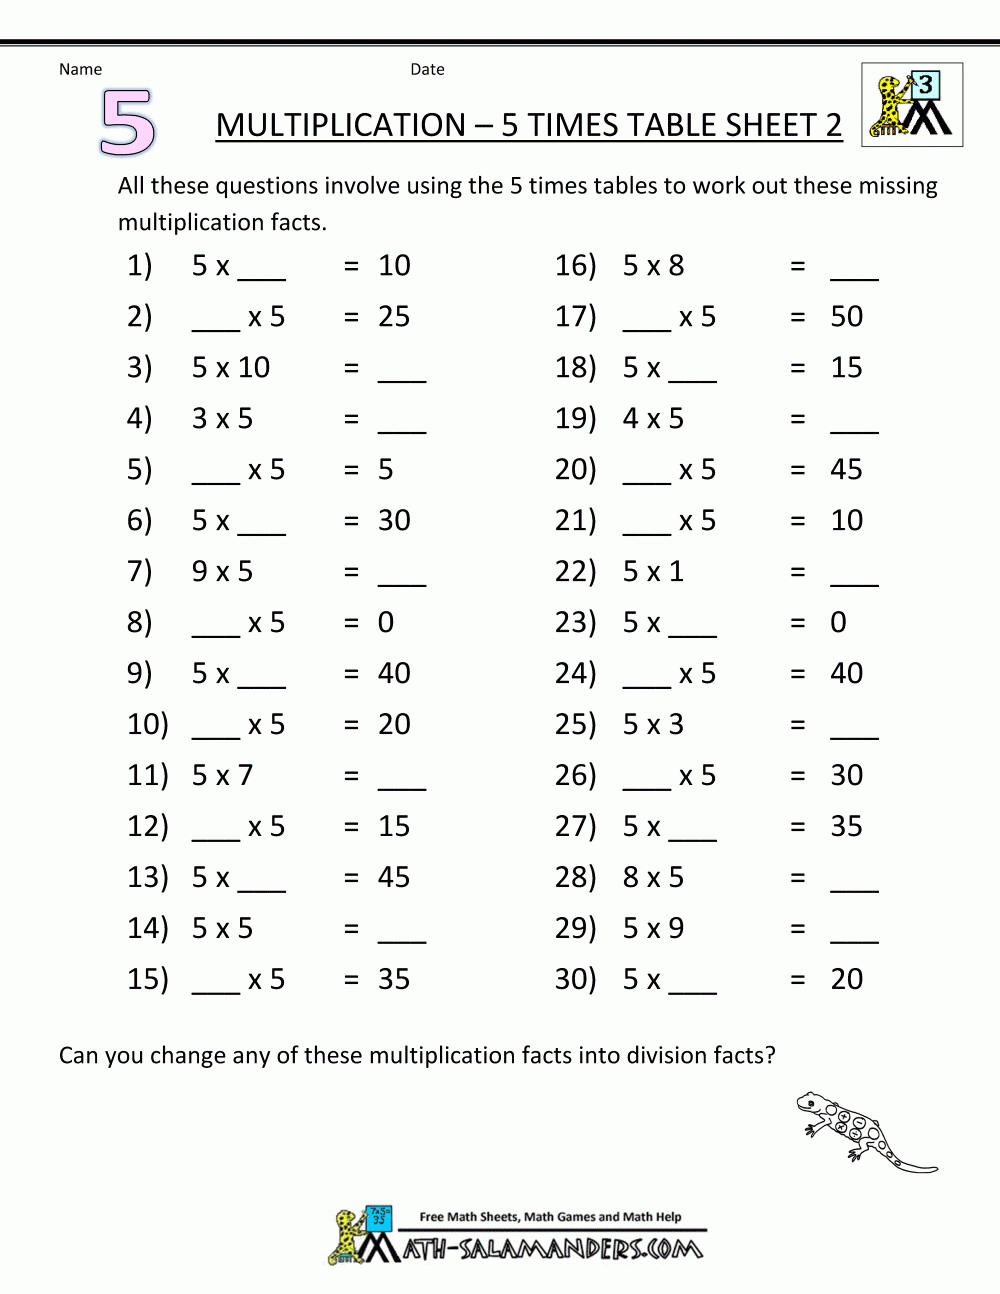 Multiplication Table Worksheets 5 Times Table 2 intended for 5's Multiplication Worksheets